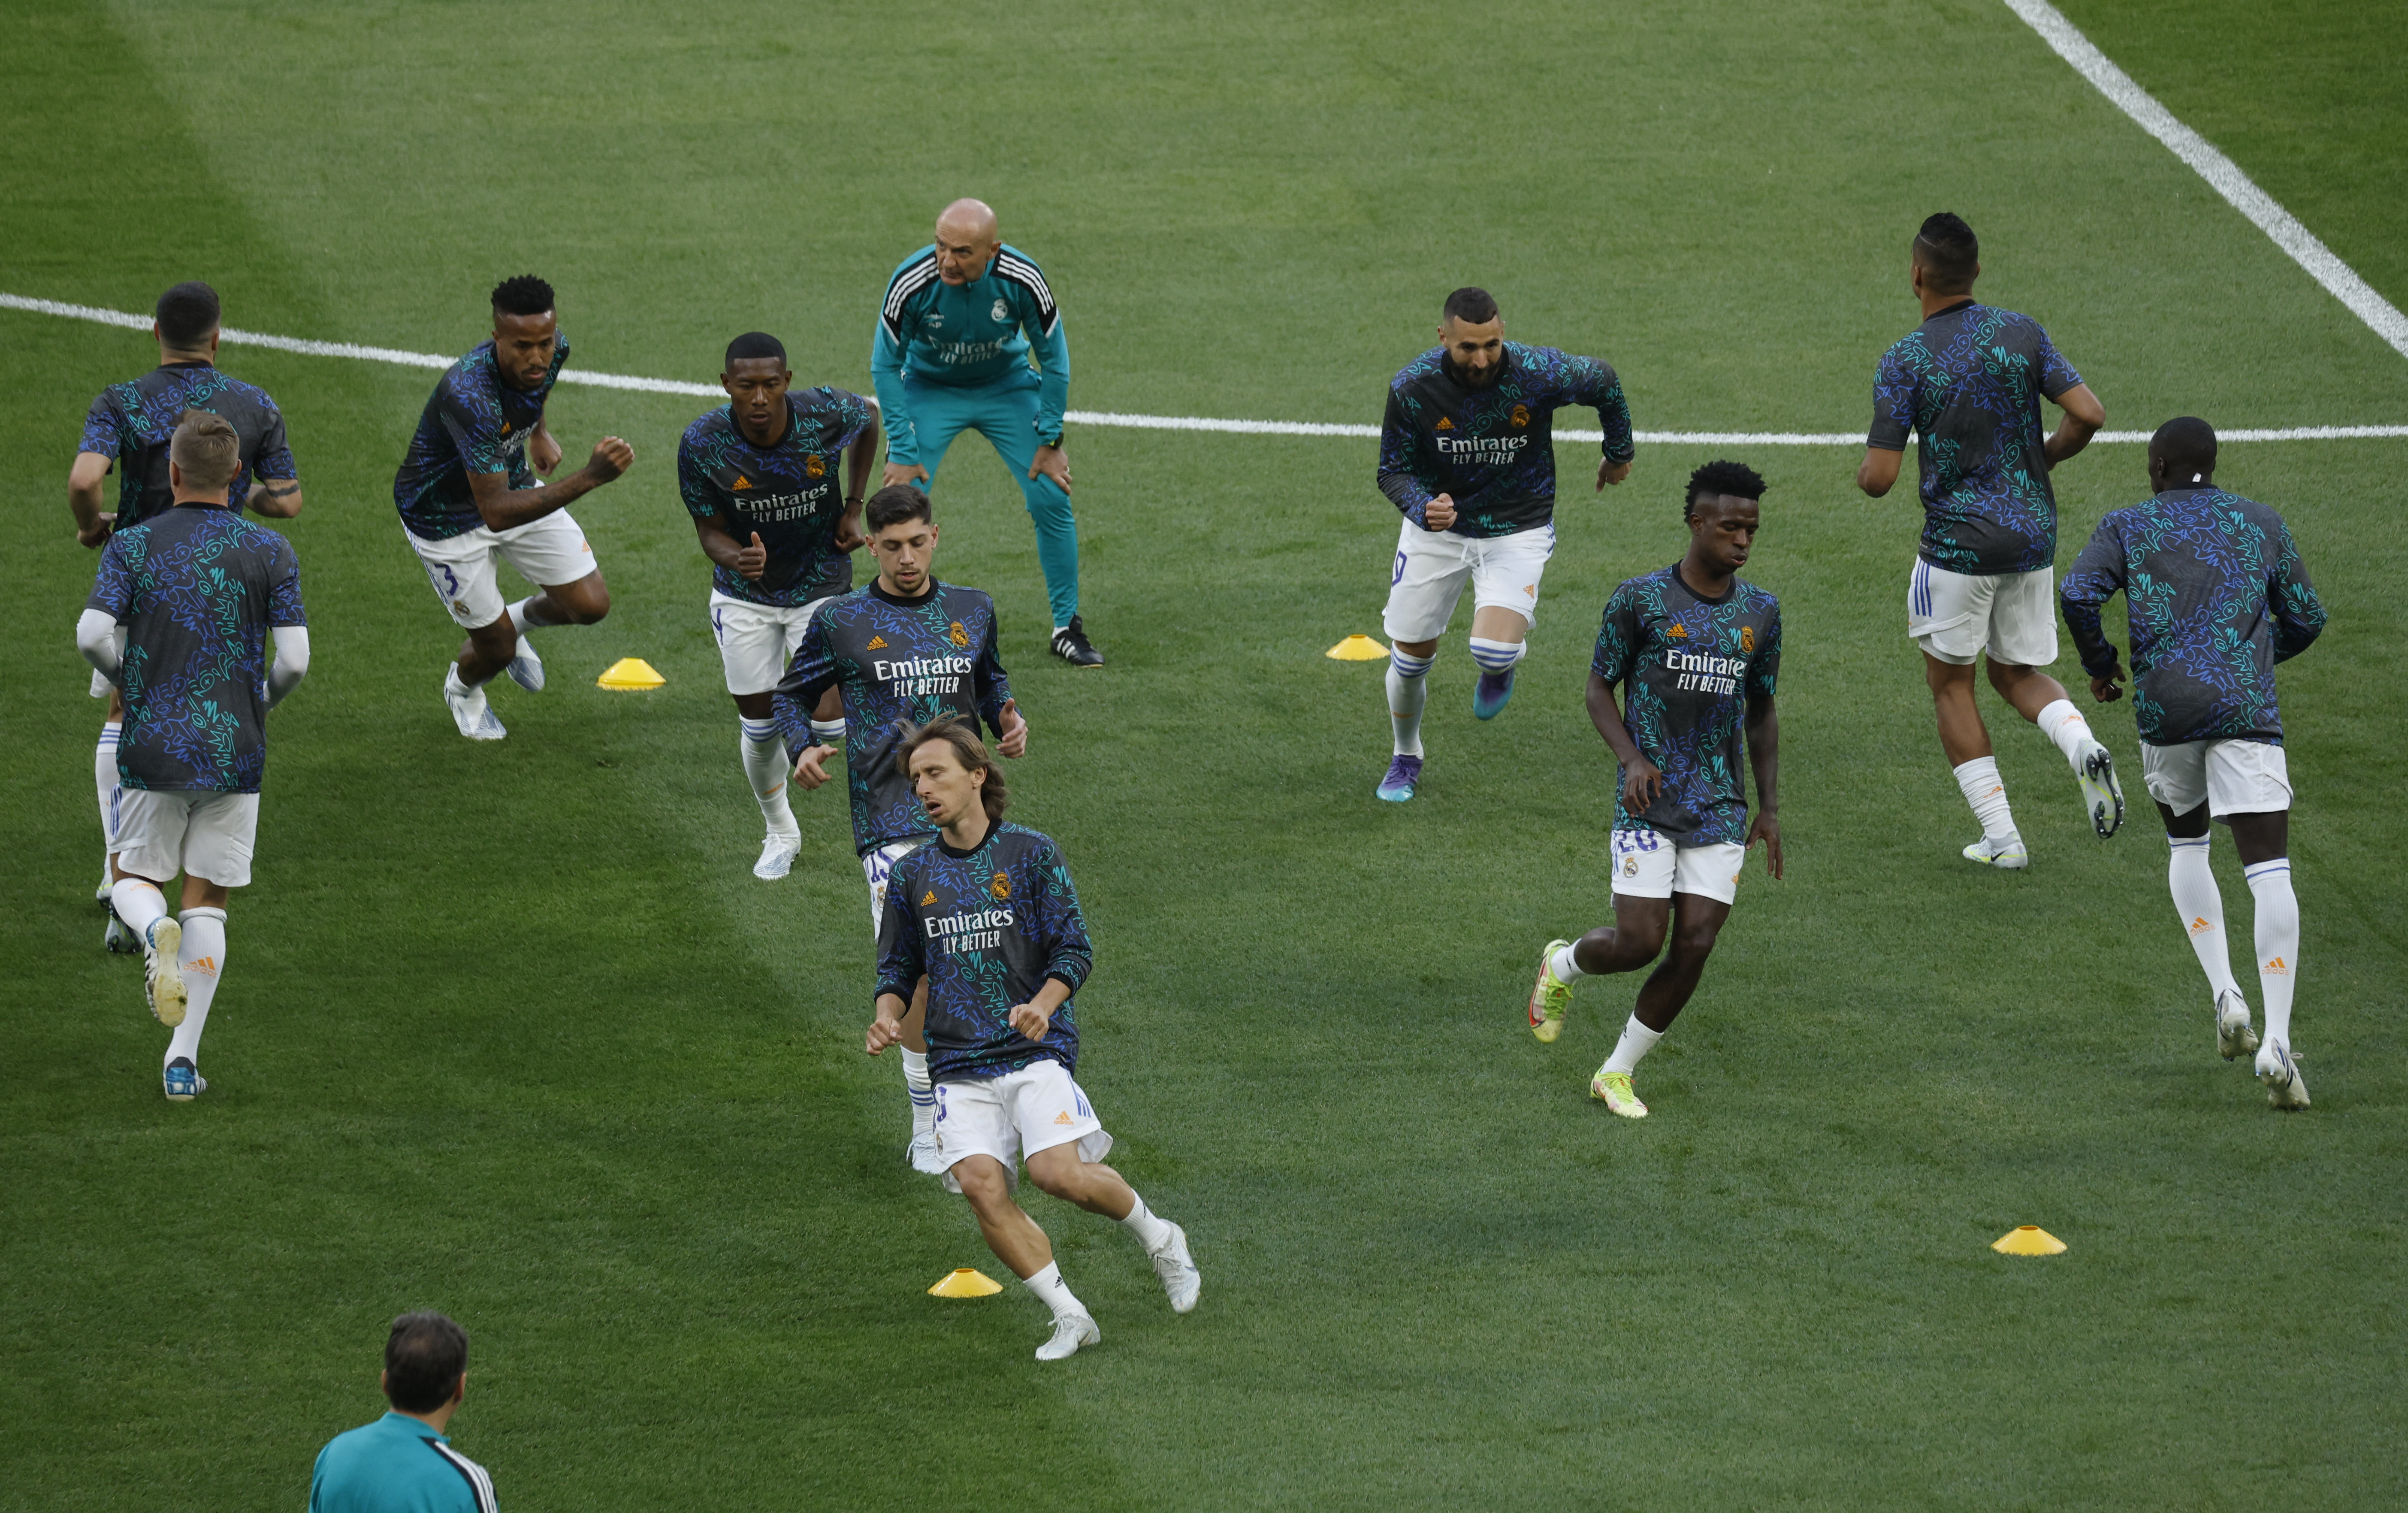 Soccer Football - Champions League Final - Liverpool v Real Madrid - Stade de France, Saint-Denis near Paris, France - May 28, 2022  Real Madrid's Luka Modric and Vinicius Junior with teammates during the warm up before the match REUTERS/Gonzalo Fuentes